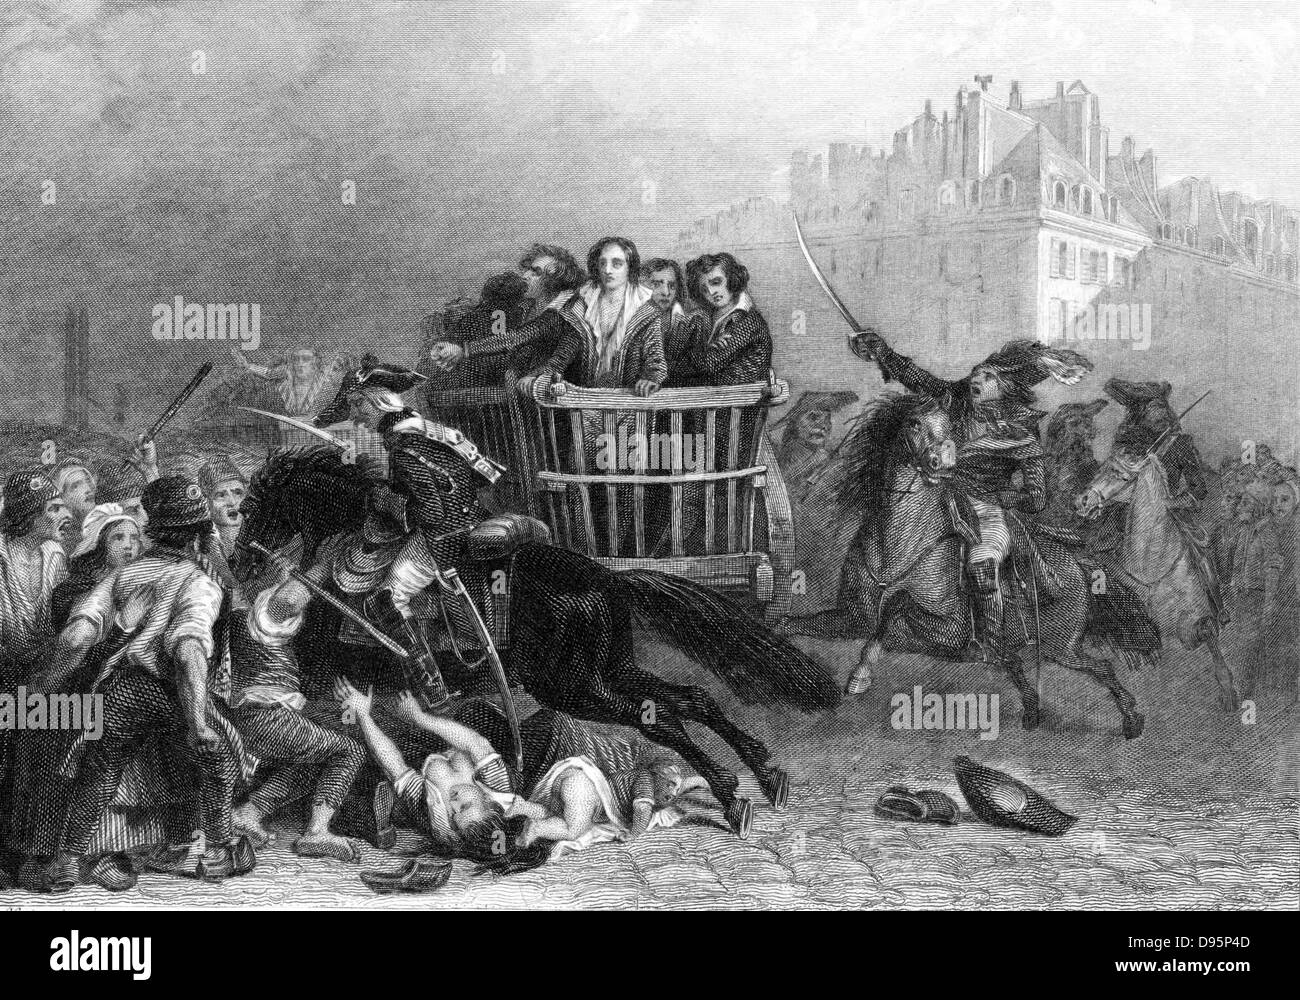 French Revolution: Last victims of the Reign of Terror being taken to the guillotine in a tumbril. Engraving. Stock Photo